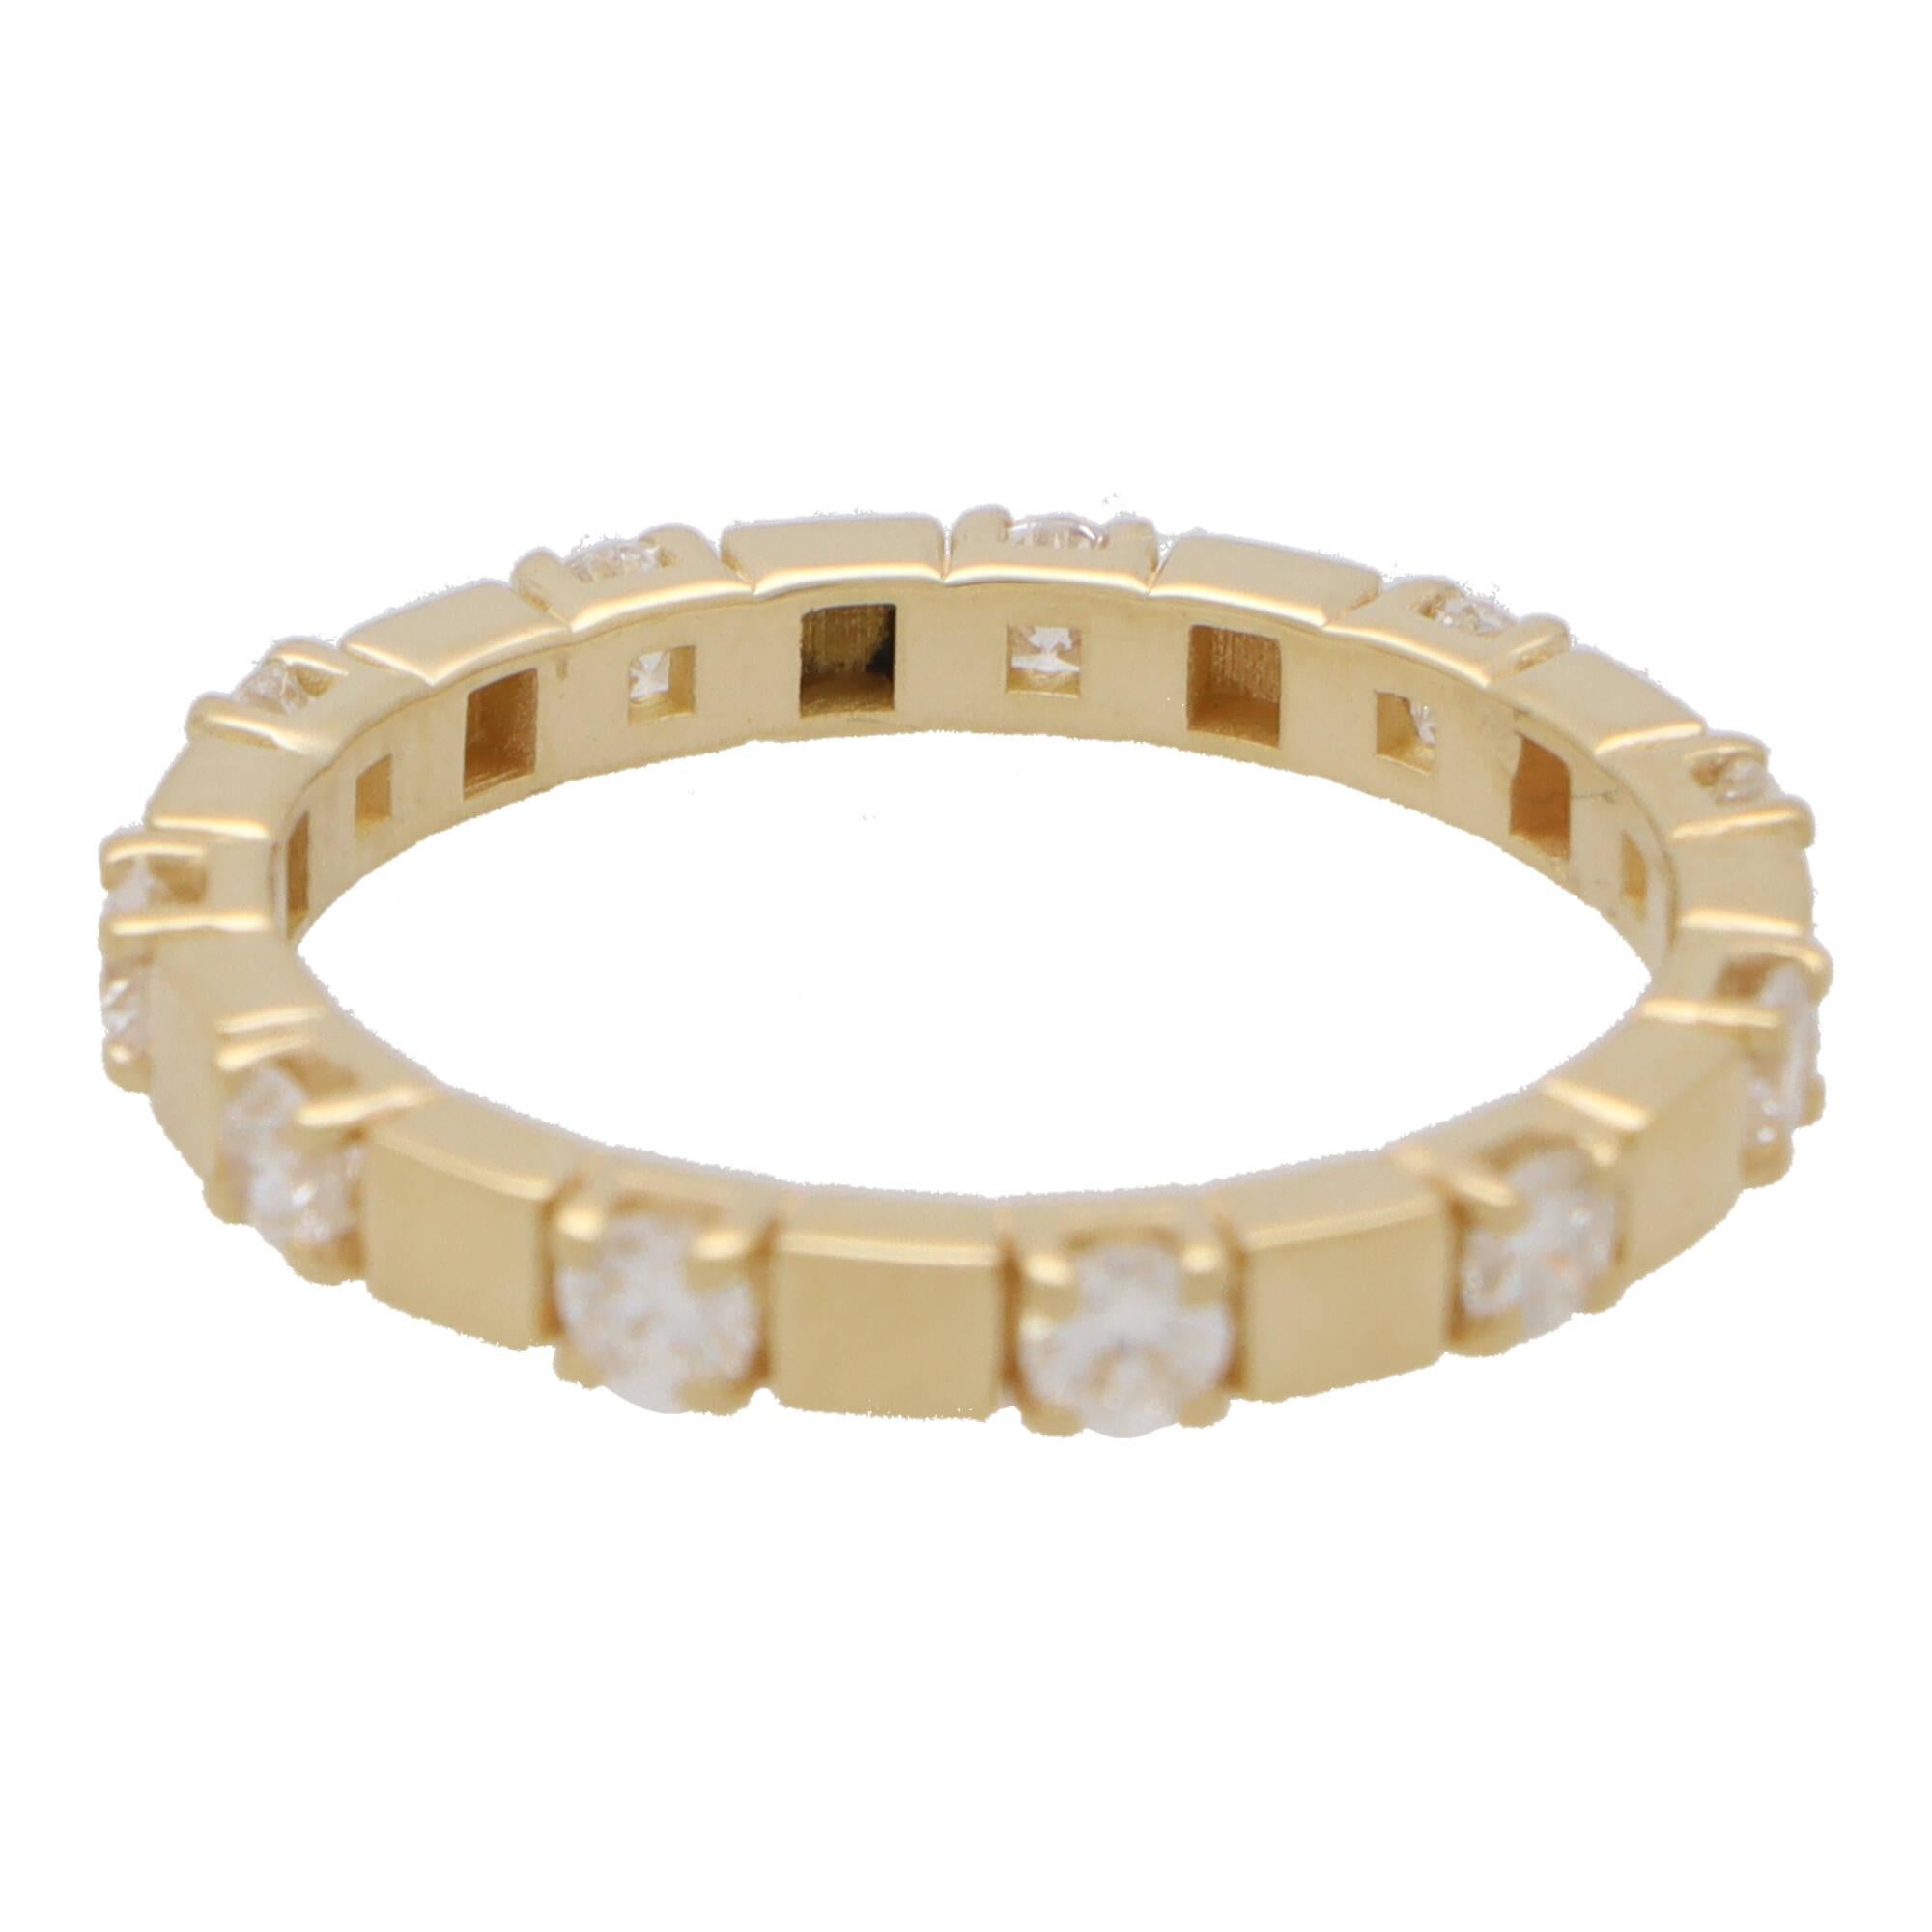 A unique contemporary diamond full eternity ring set in 18k yellow gold.

The eternity ring is set with exactly 11 round brilliant cut diamonds; all of which are claw set within a 2.5-millimetre band (there is a height of 2-millimetres). What makes